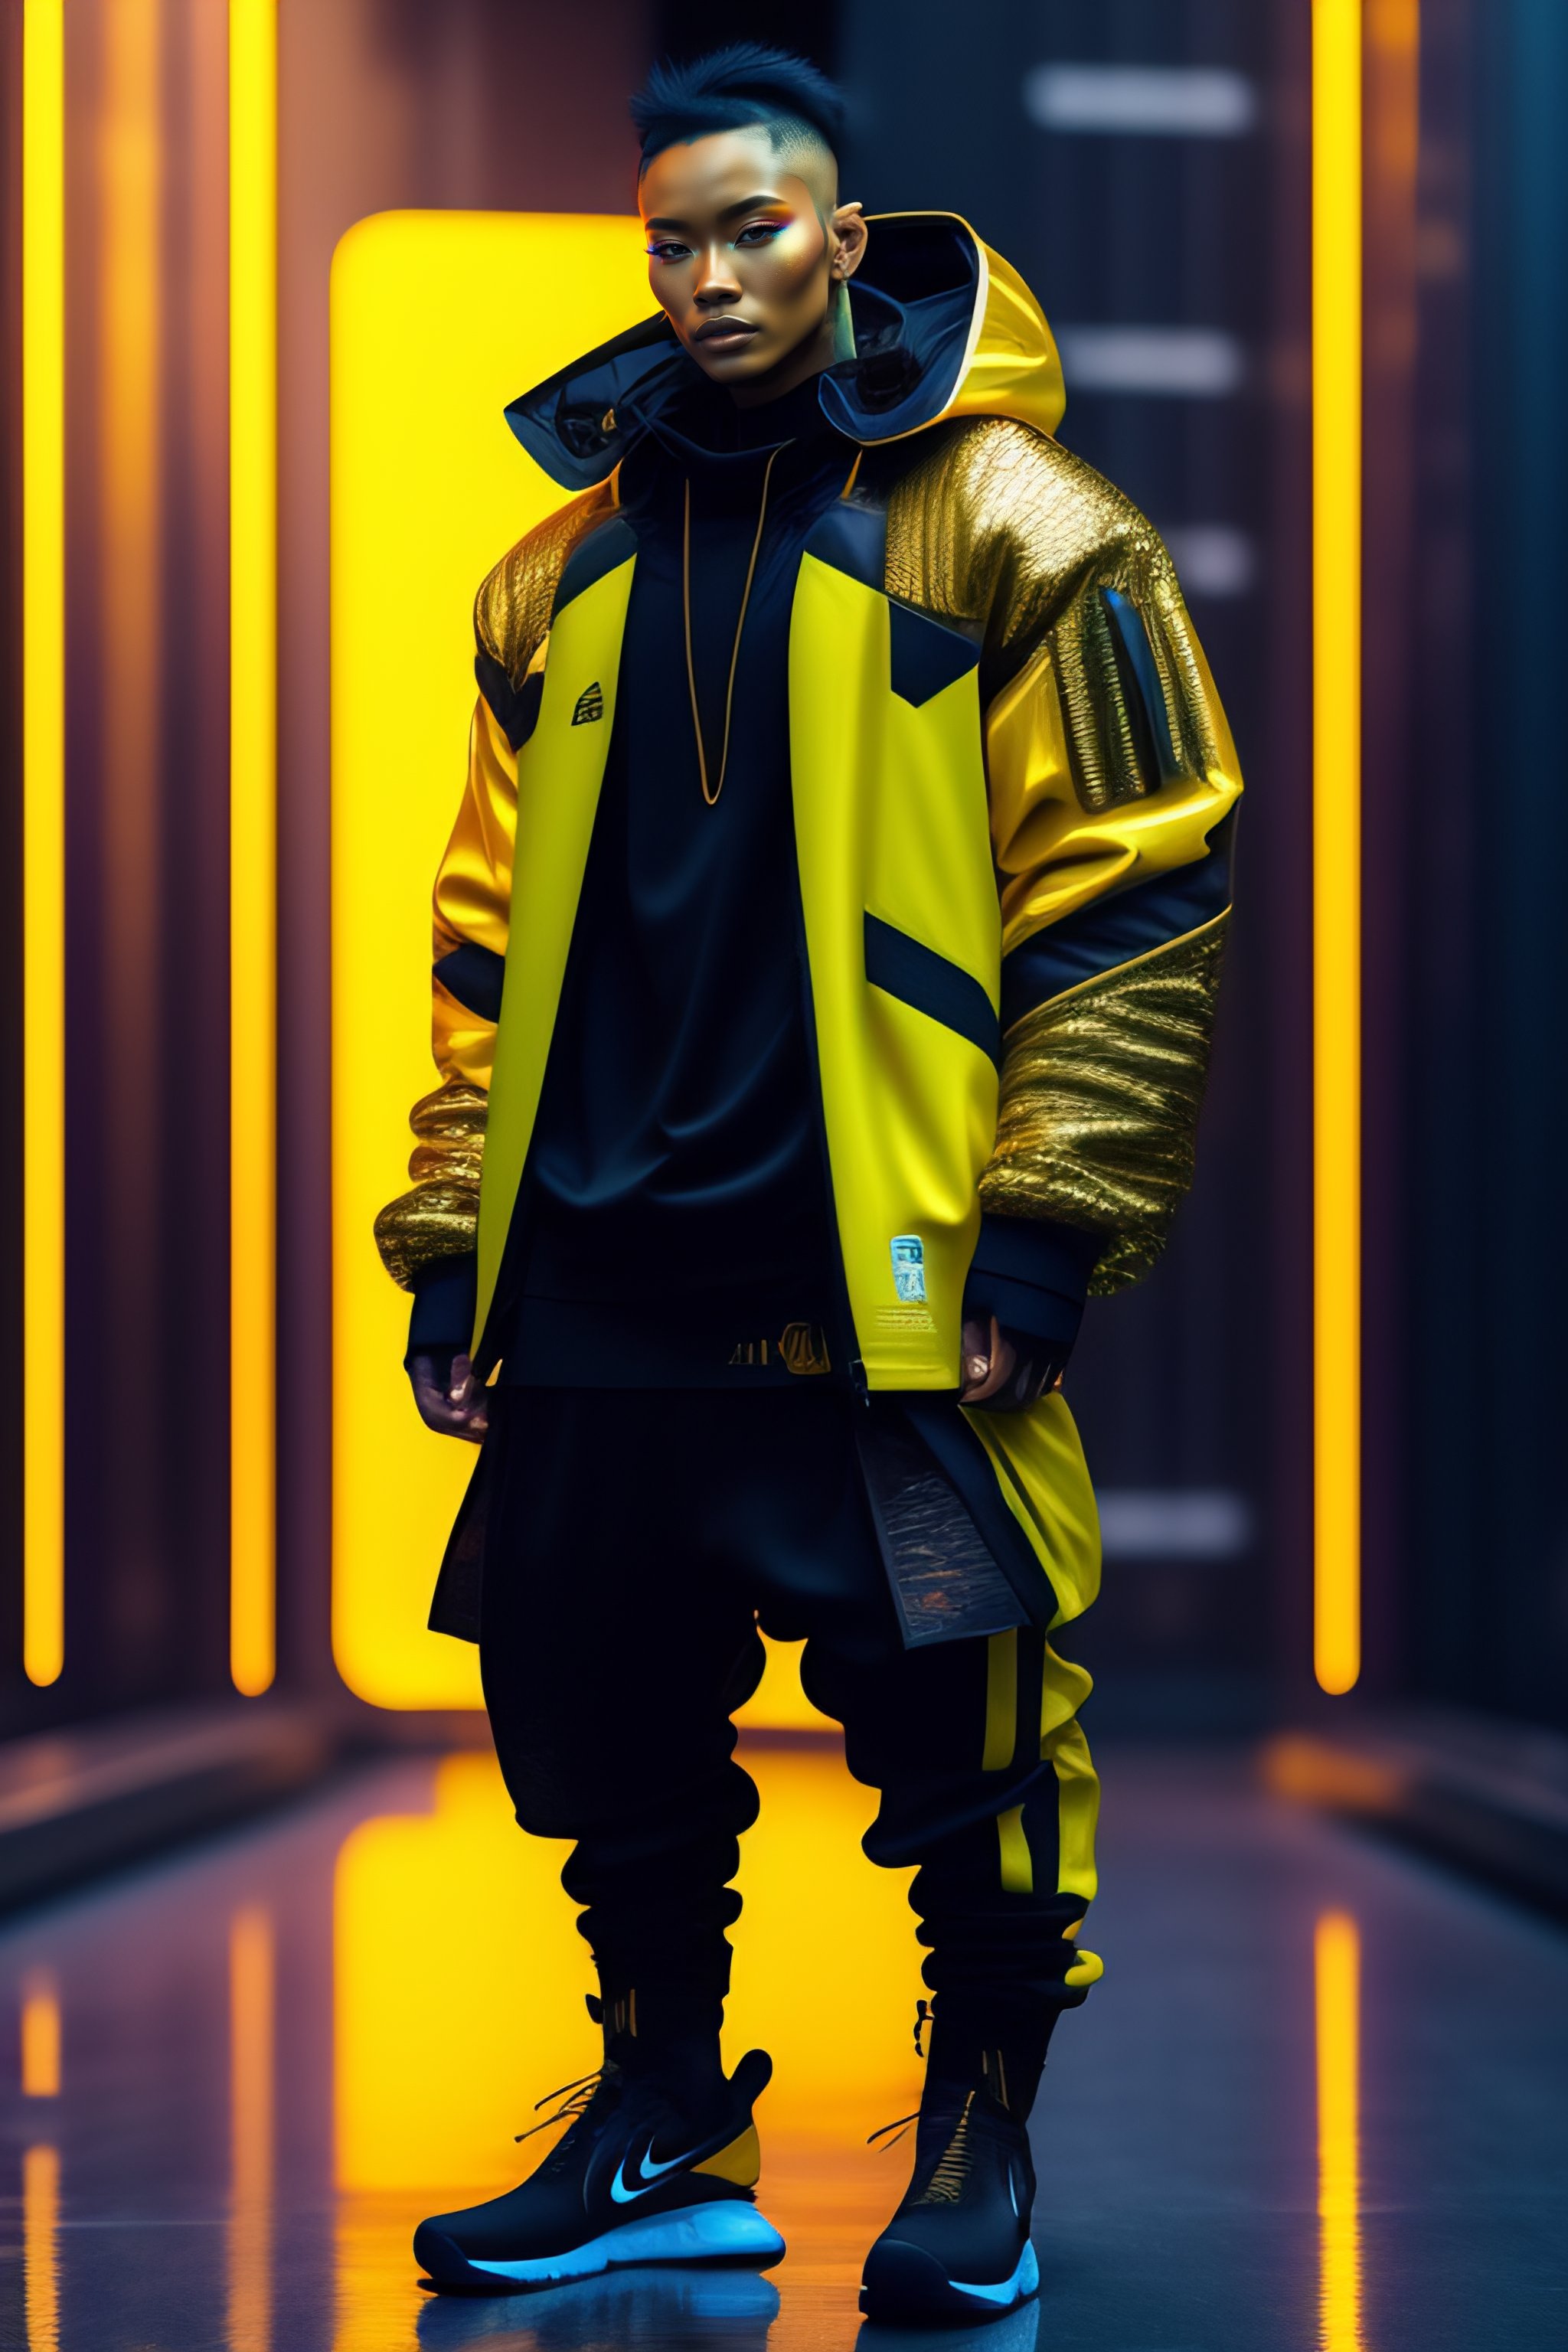 Lexica - Cyberpunk techwear streetwear look and clothes, we can see ...